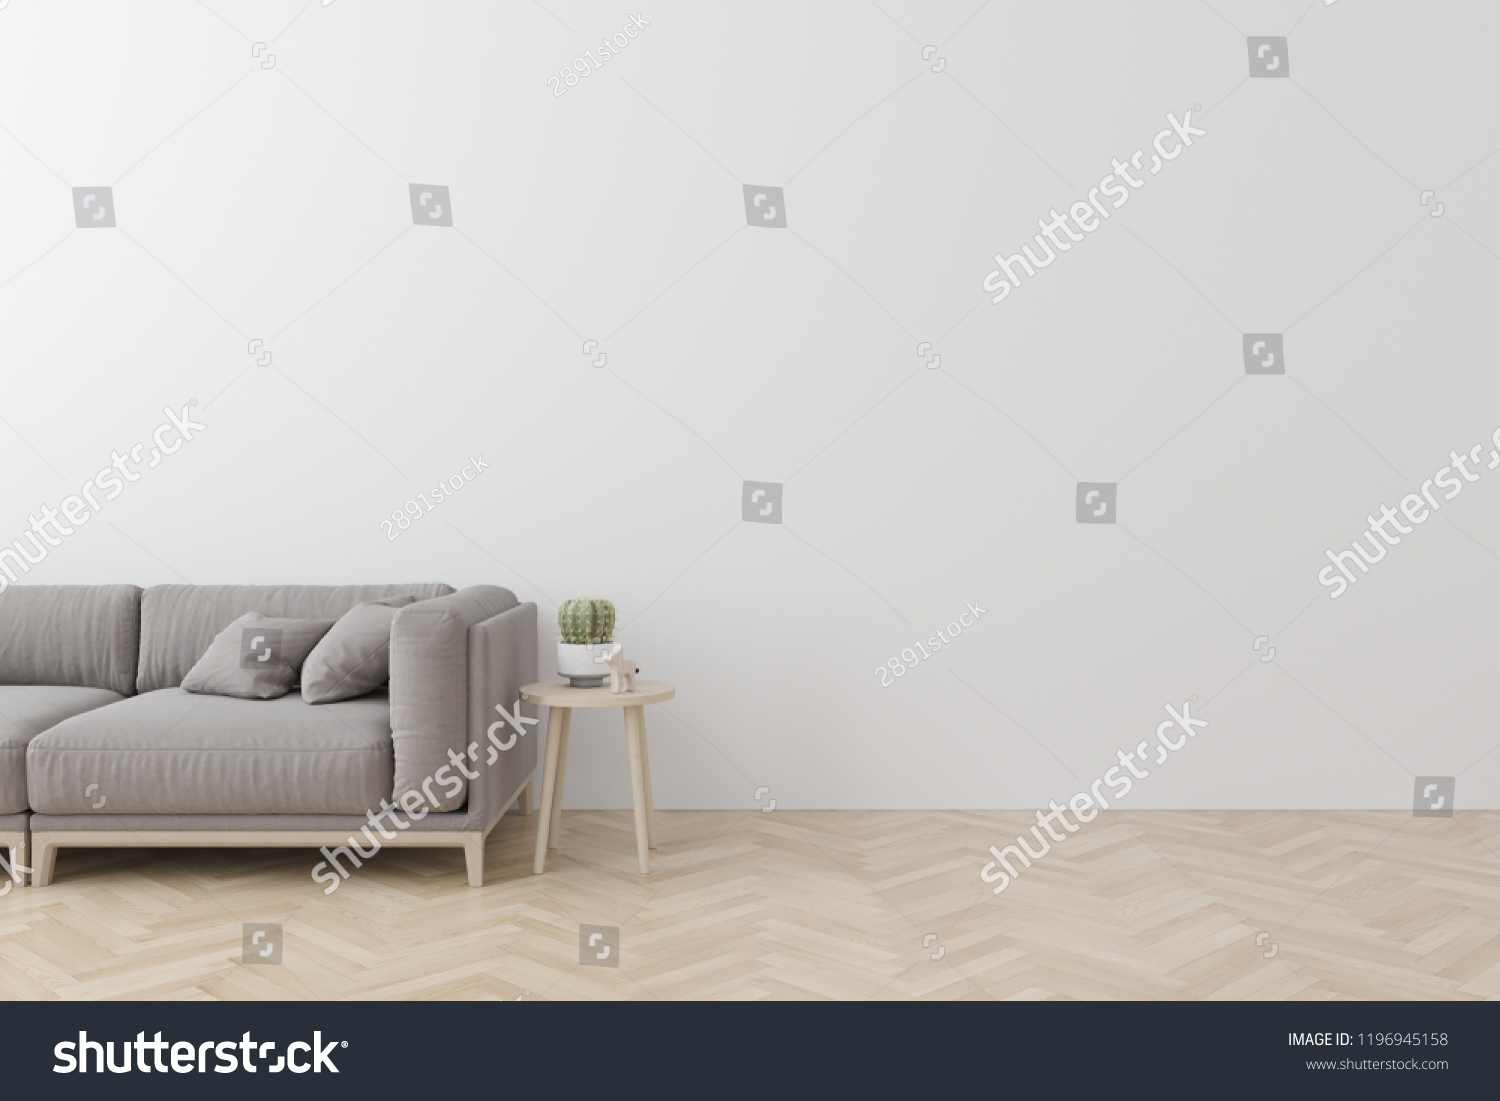 Interior of living room modern style with  fabric sofa, side table and empty white wall on wood floor #1196945158